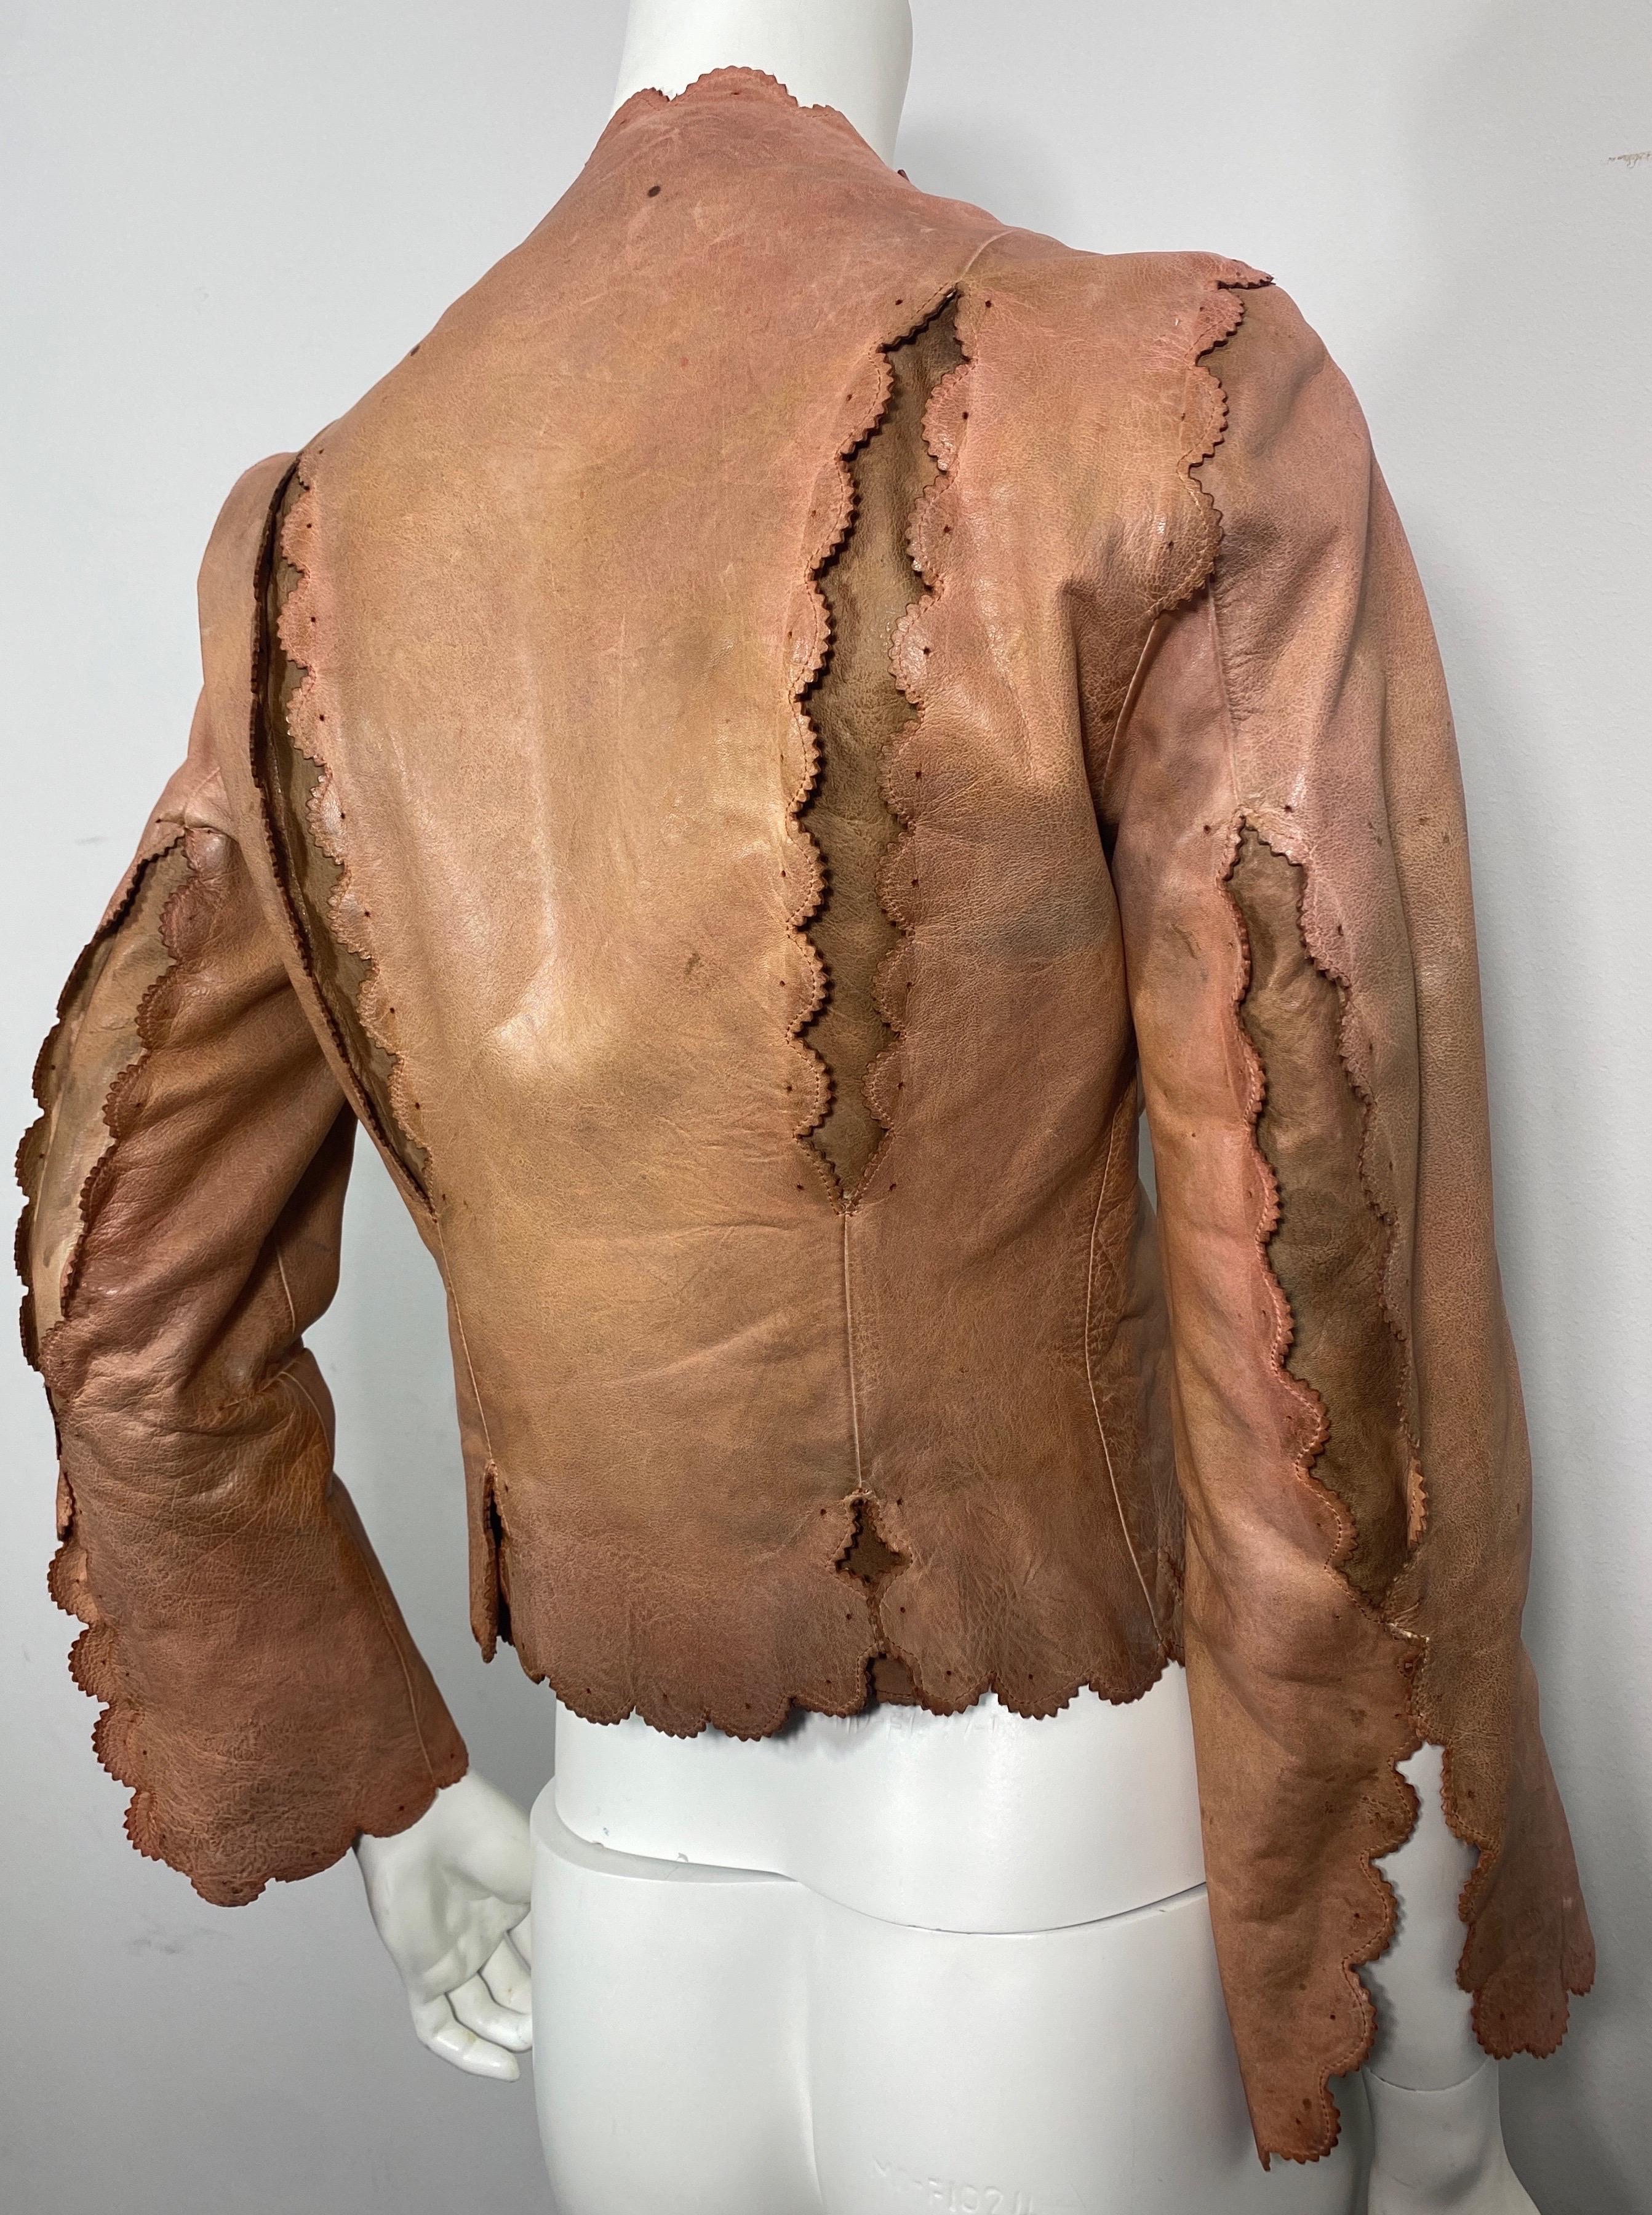 Alexander McQueen Dark Nude Distressed Leather Jacket-Size 40 For Sale 6